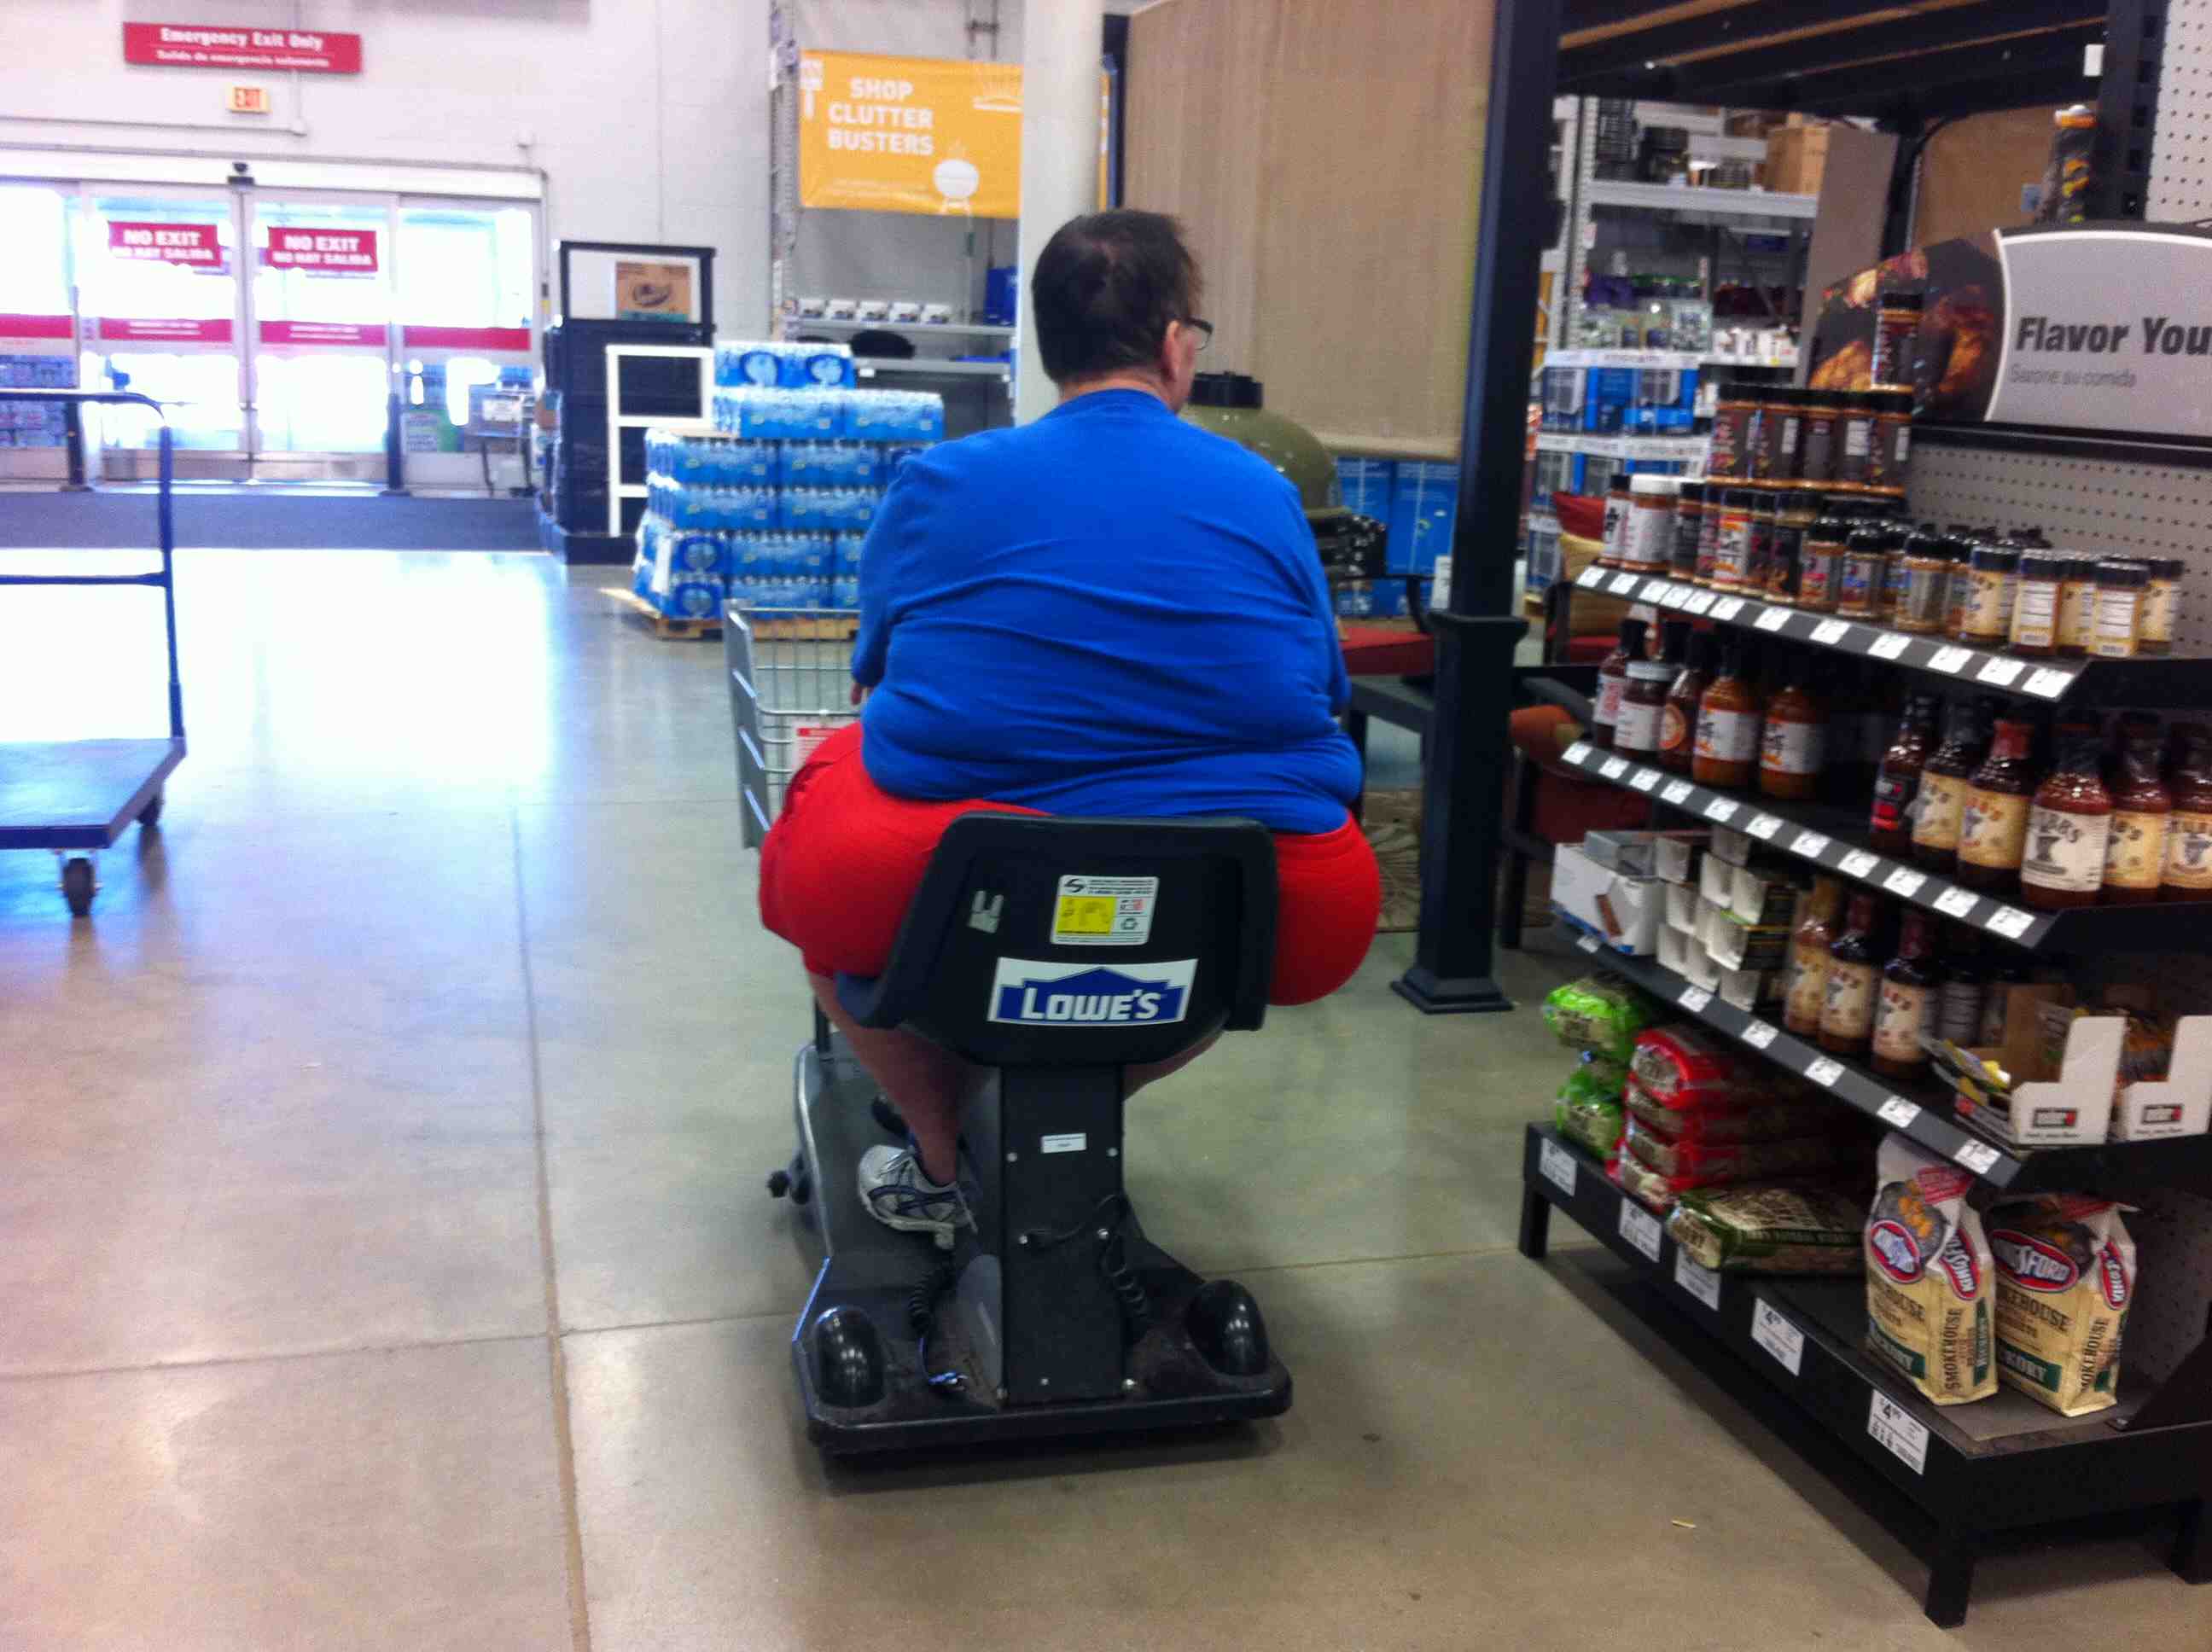 Images Wikimedia Commons/21 ParentingPatch Obese_Man_in_Motorized_Cart_at_Lowe's.jpg